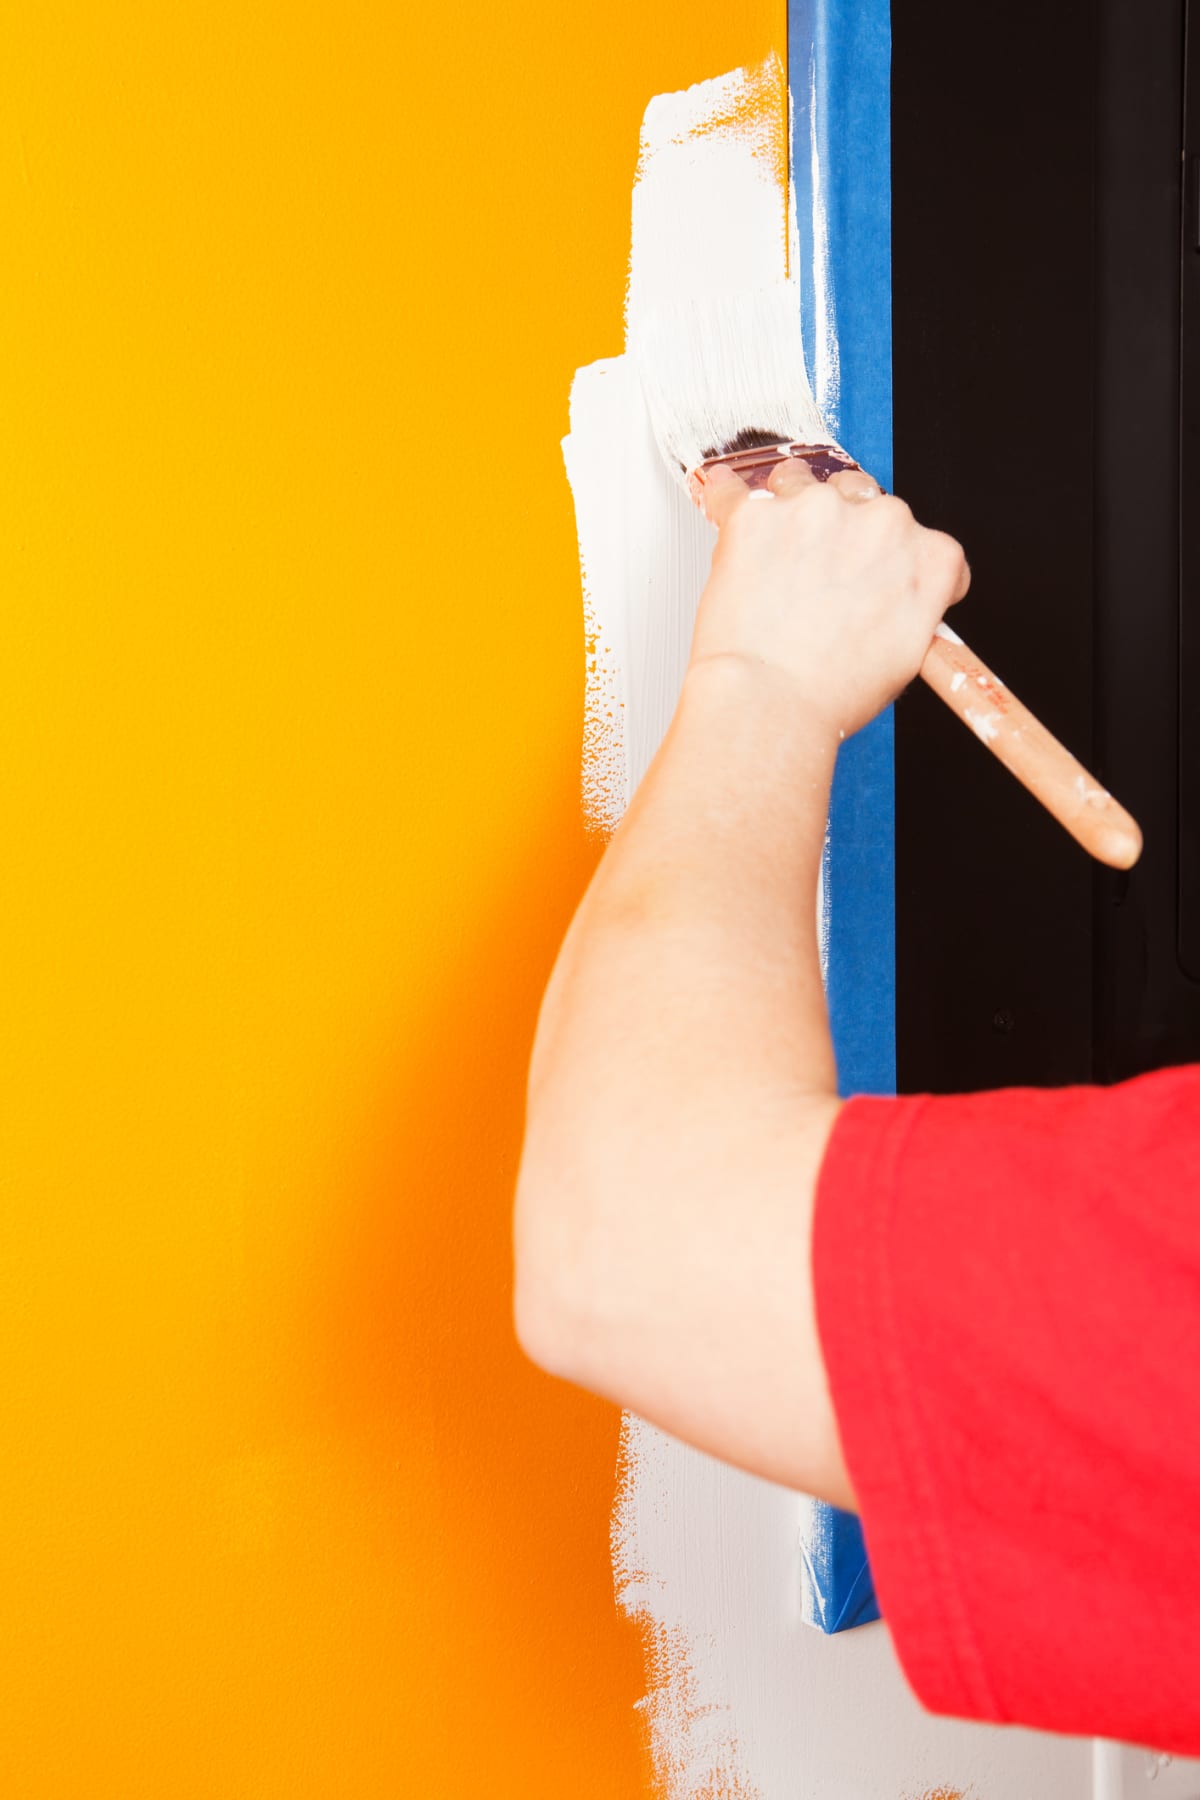 Close up view of a person painting over painter's tape using a paint brush